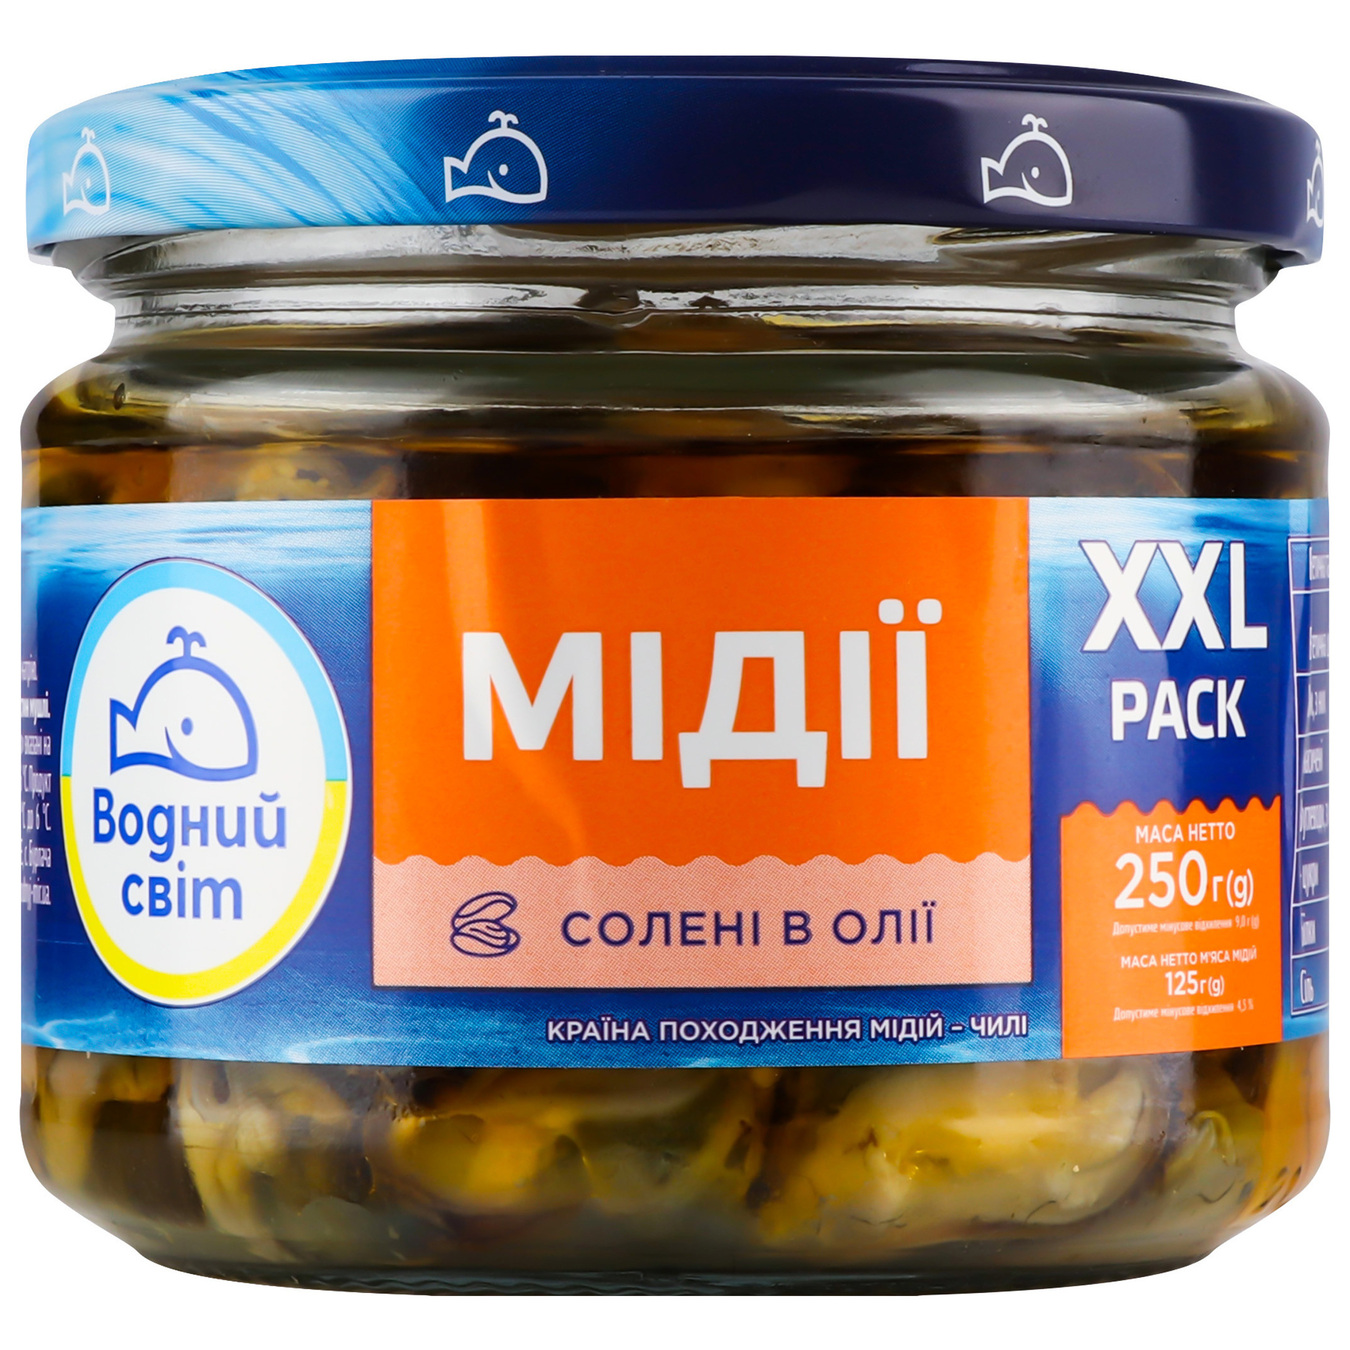 Water World mussels salted in oil 250g